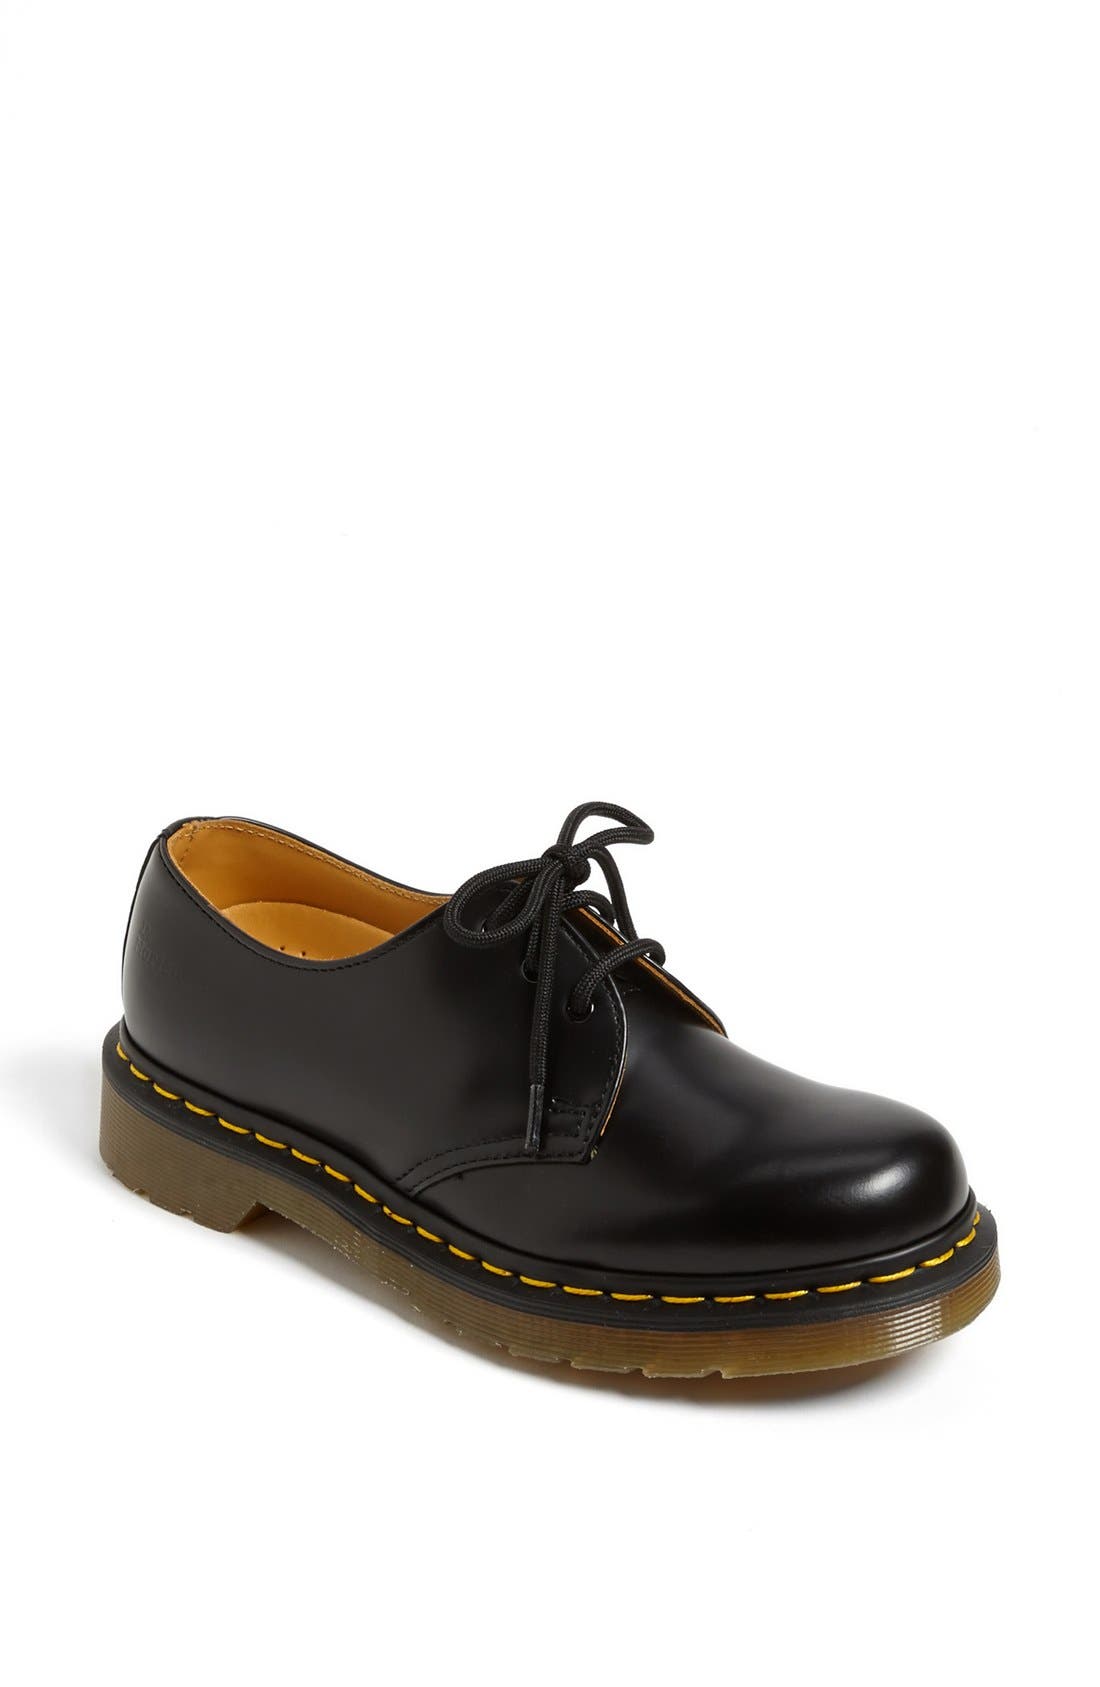 Dr. Martens '1461 W' Oxford in Black Smooth at Nordstrom, Size 6Us